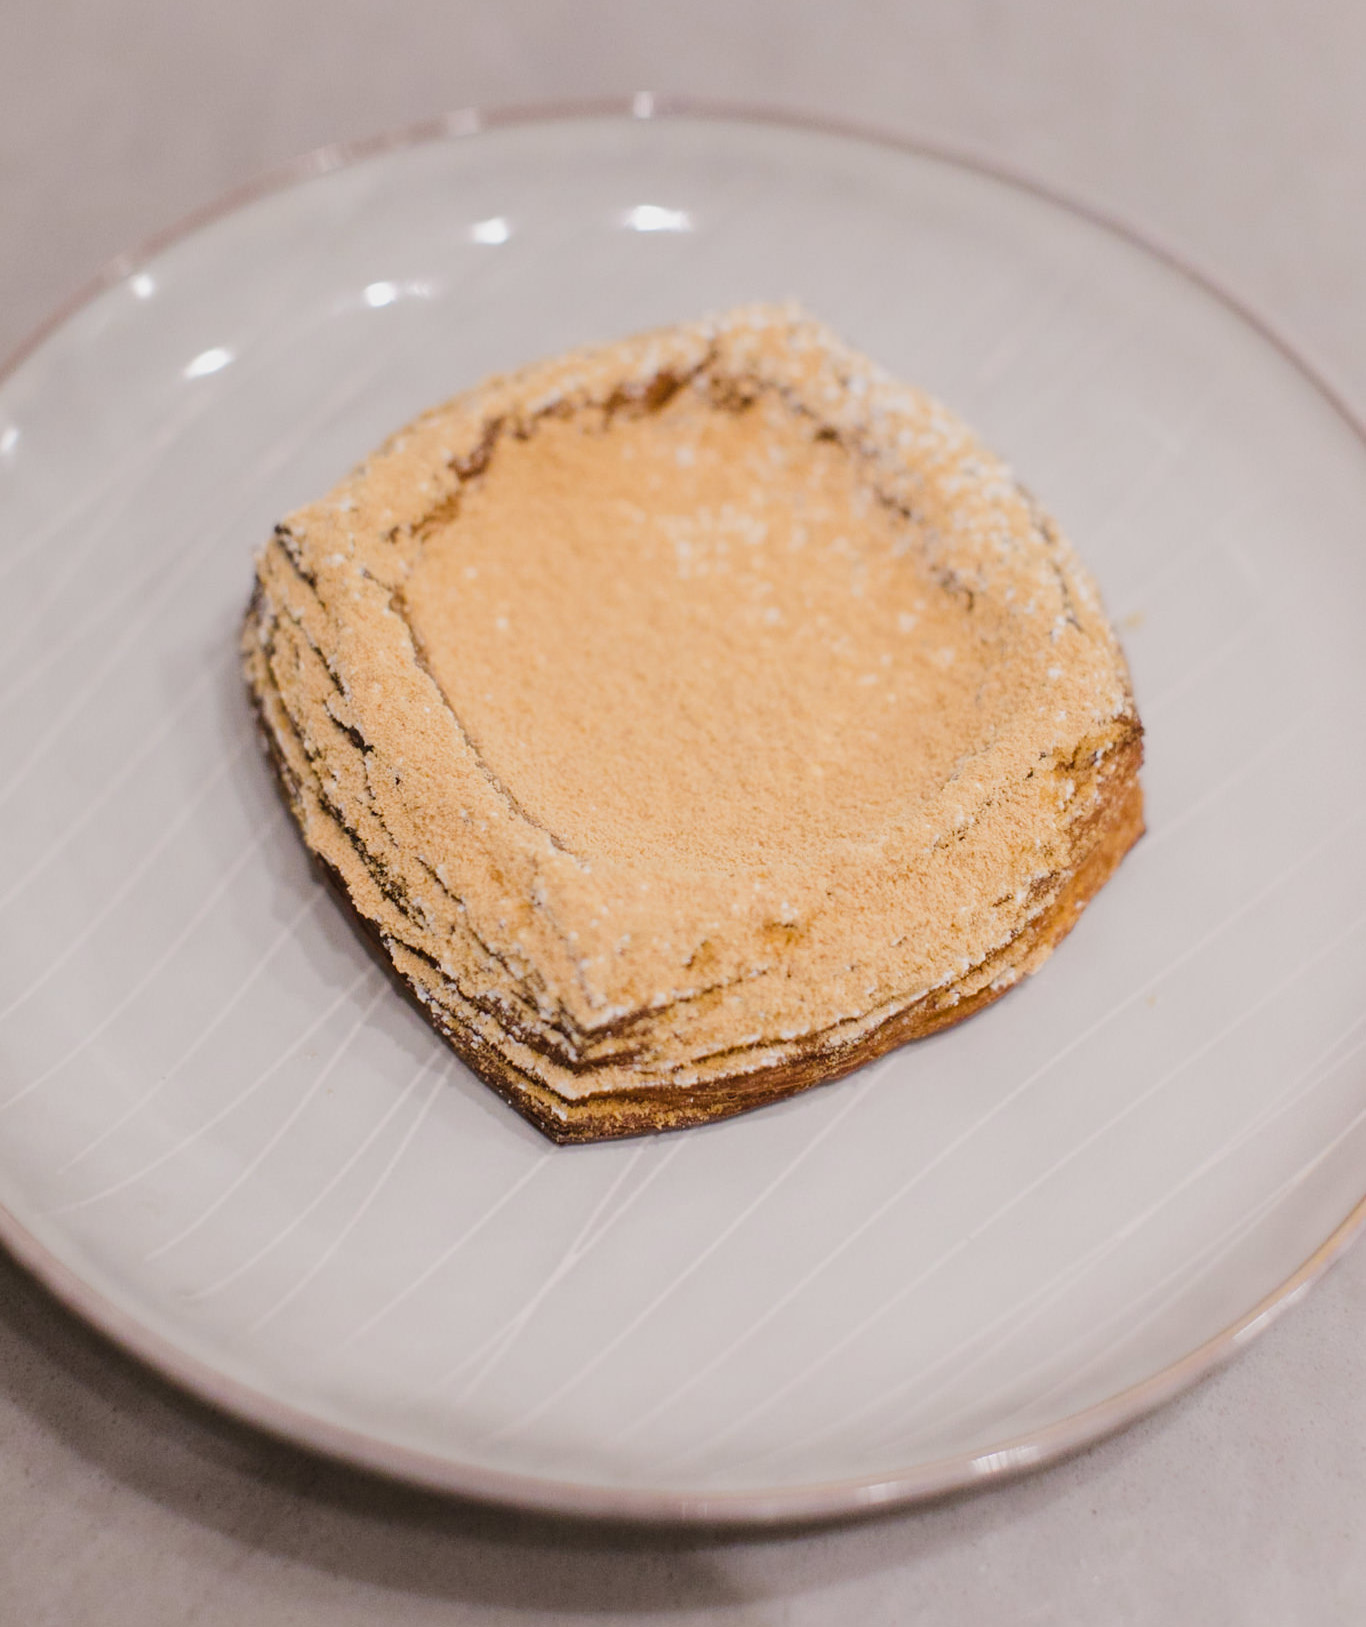 A square croissant topped with stretchy Korean rice cake dusted with roasted soybean poweder.